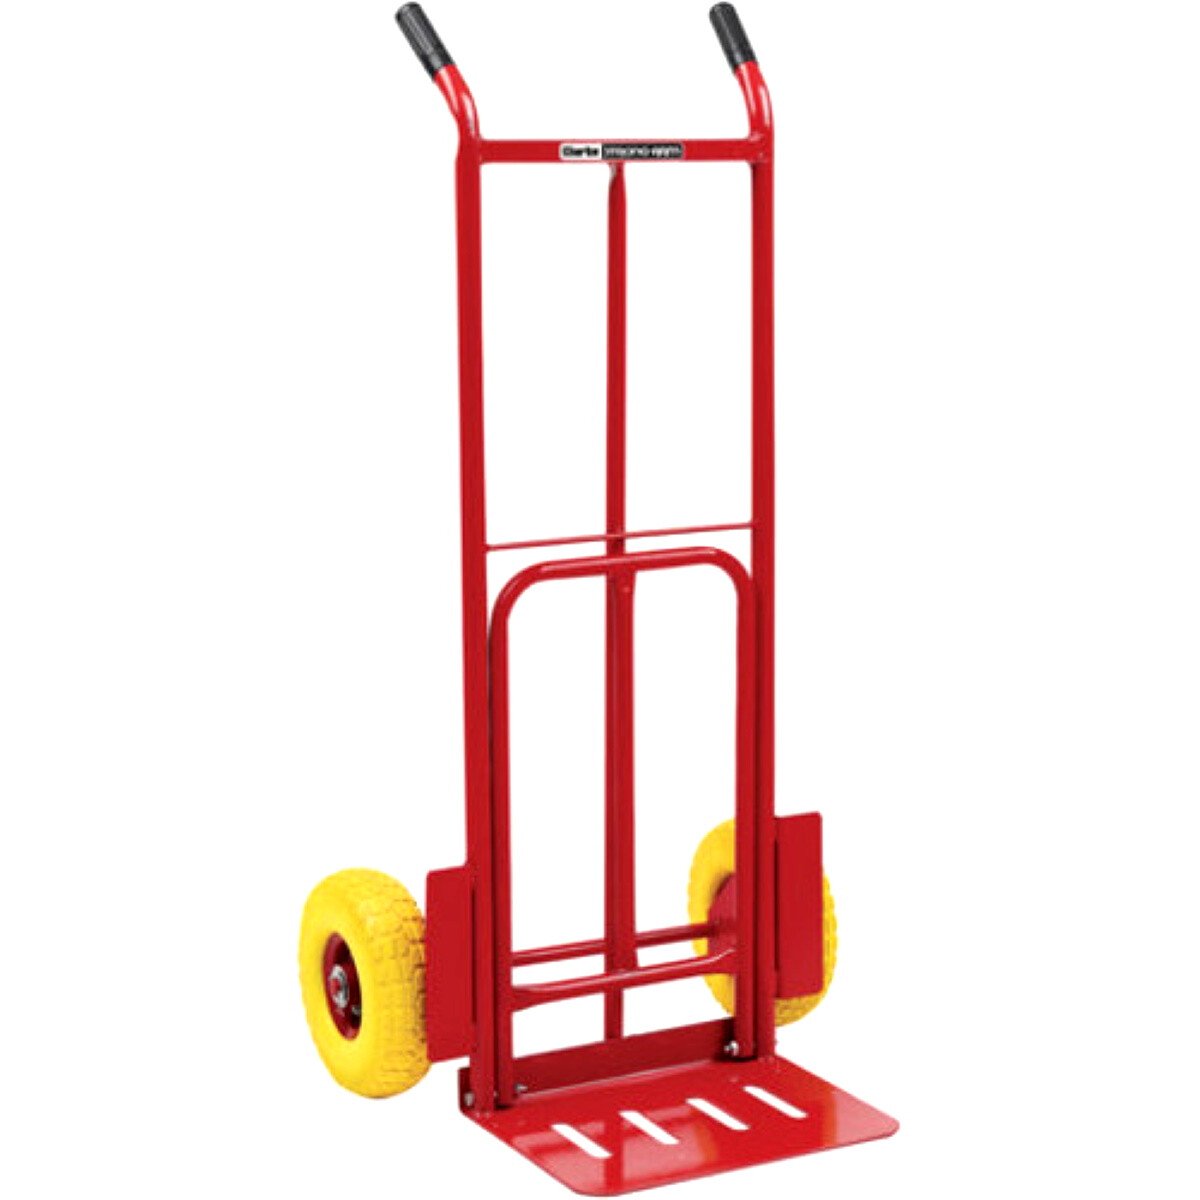 Clarke CST11PF 250kg Sack Truck with Puncture Proof Tyres 6500184